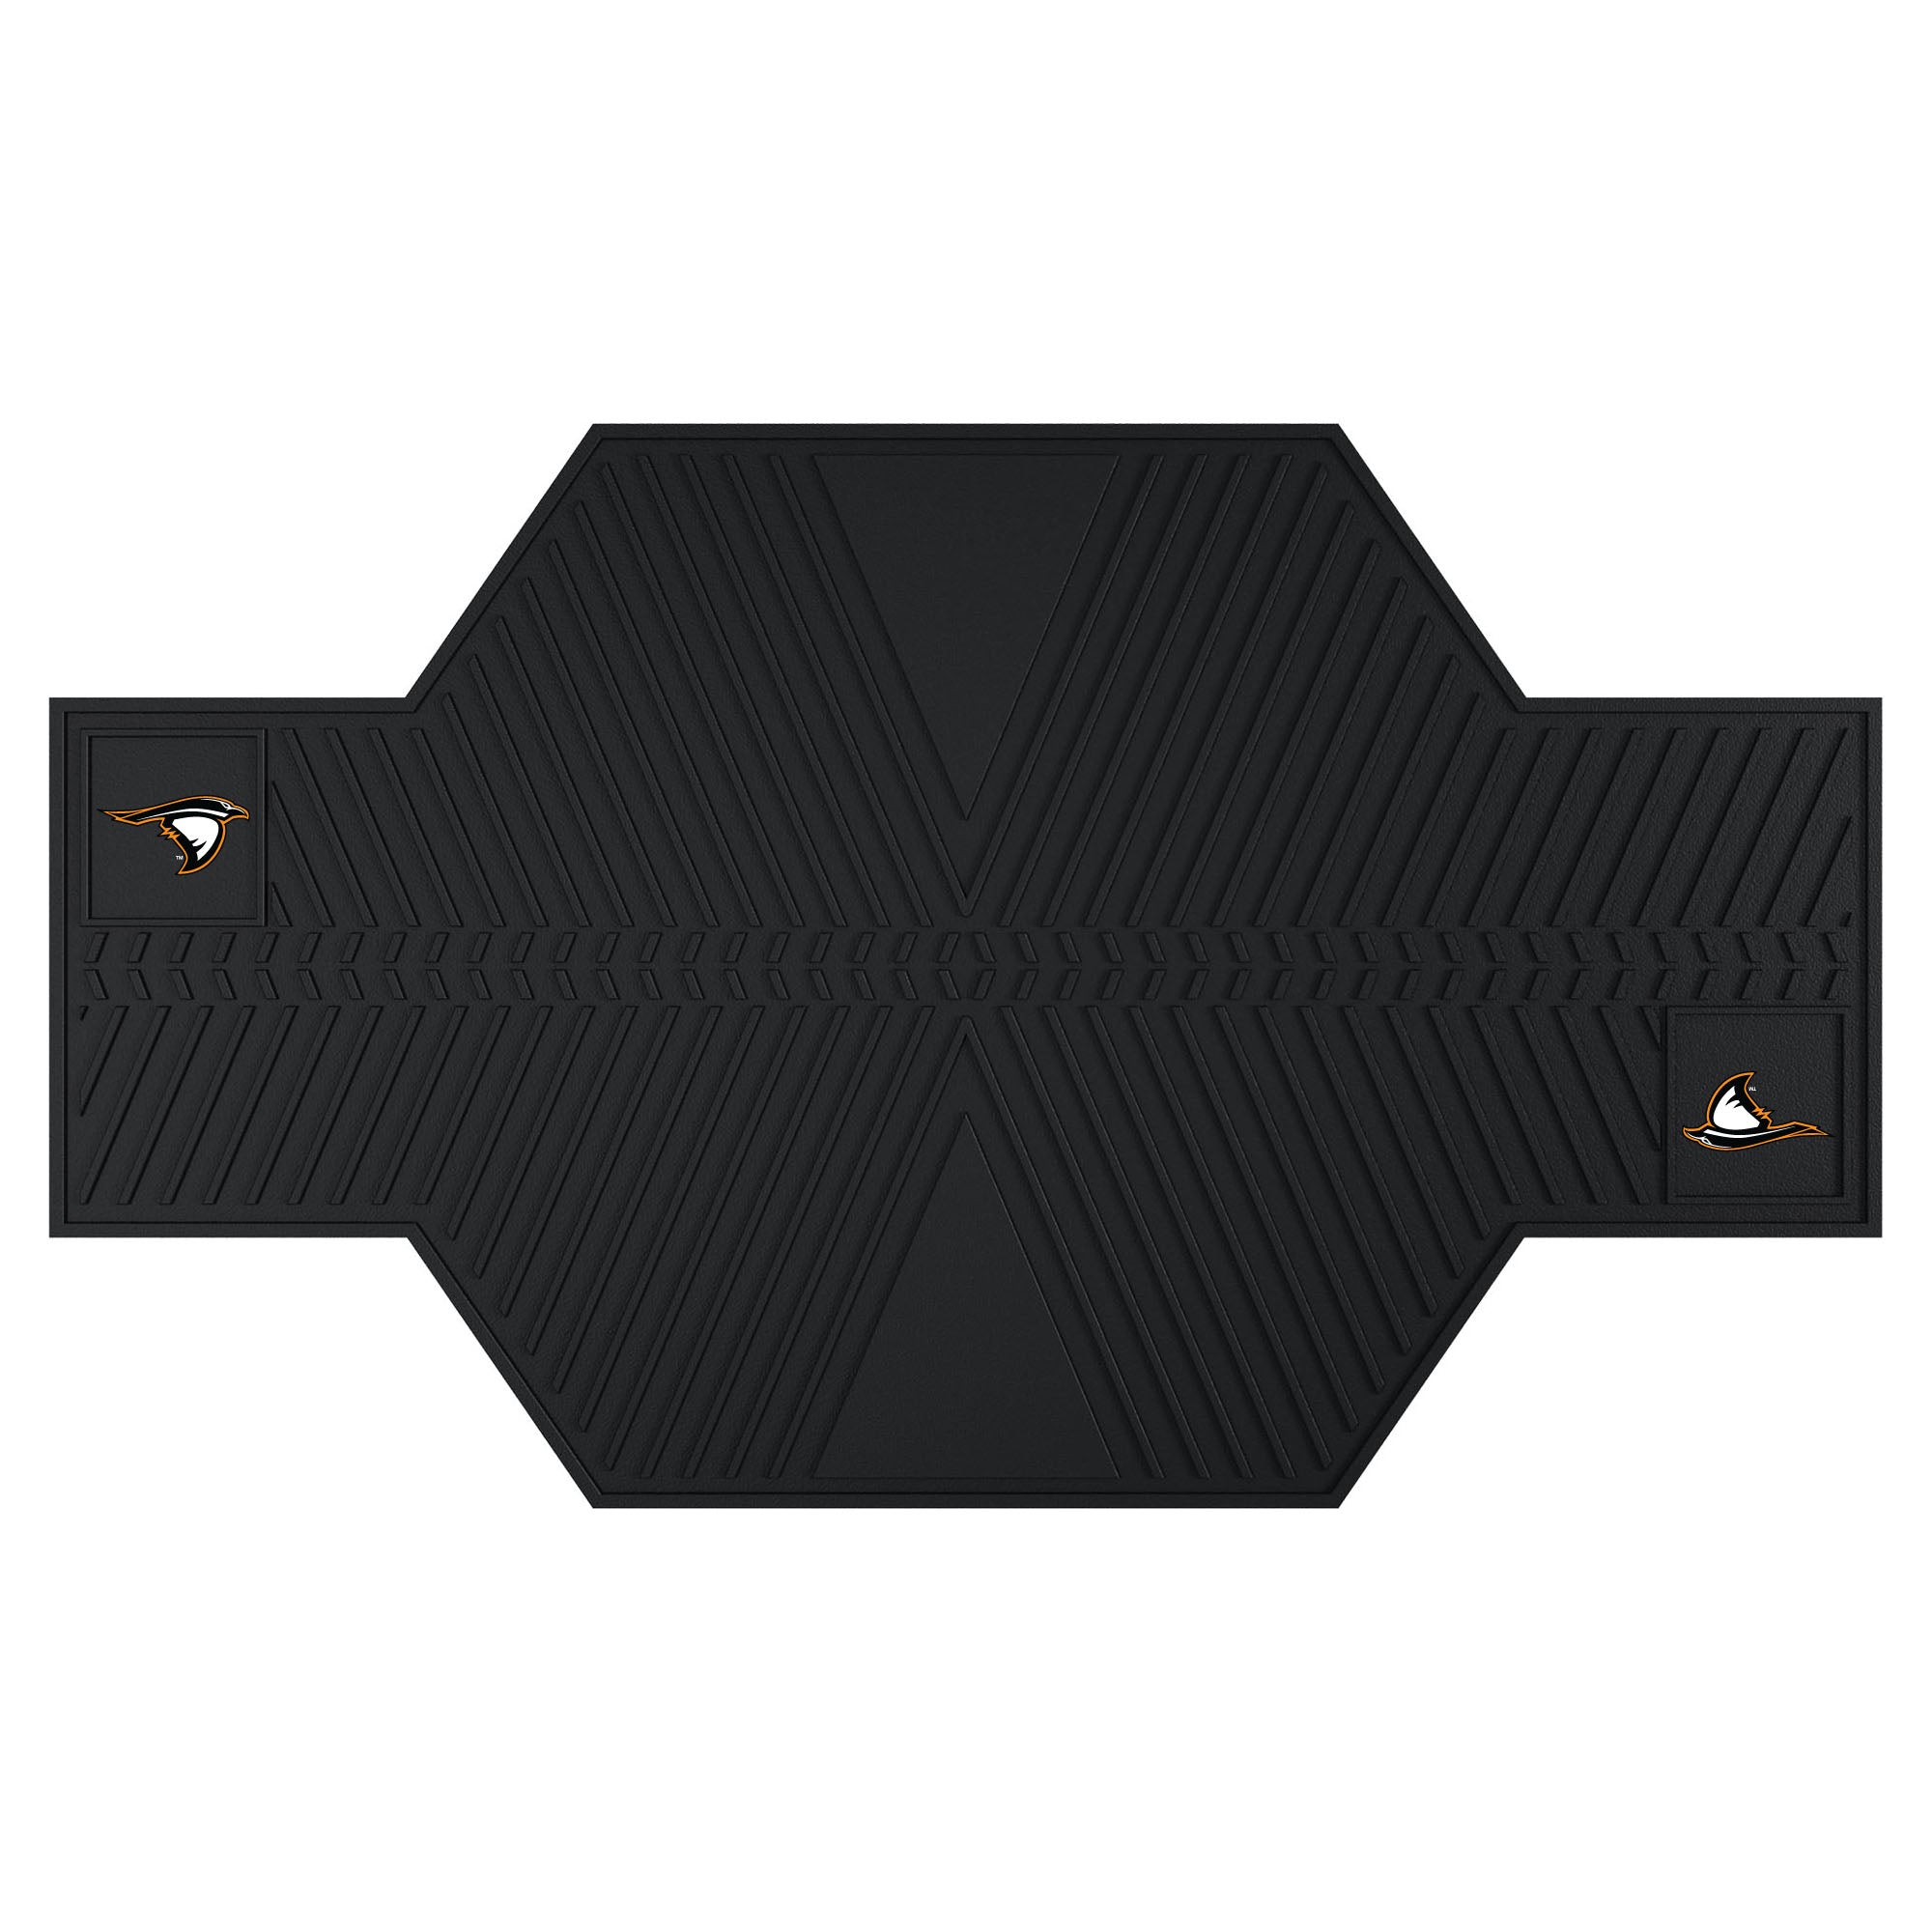 FANMATS, Anderson University (IN) Motorcycle Mat